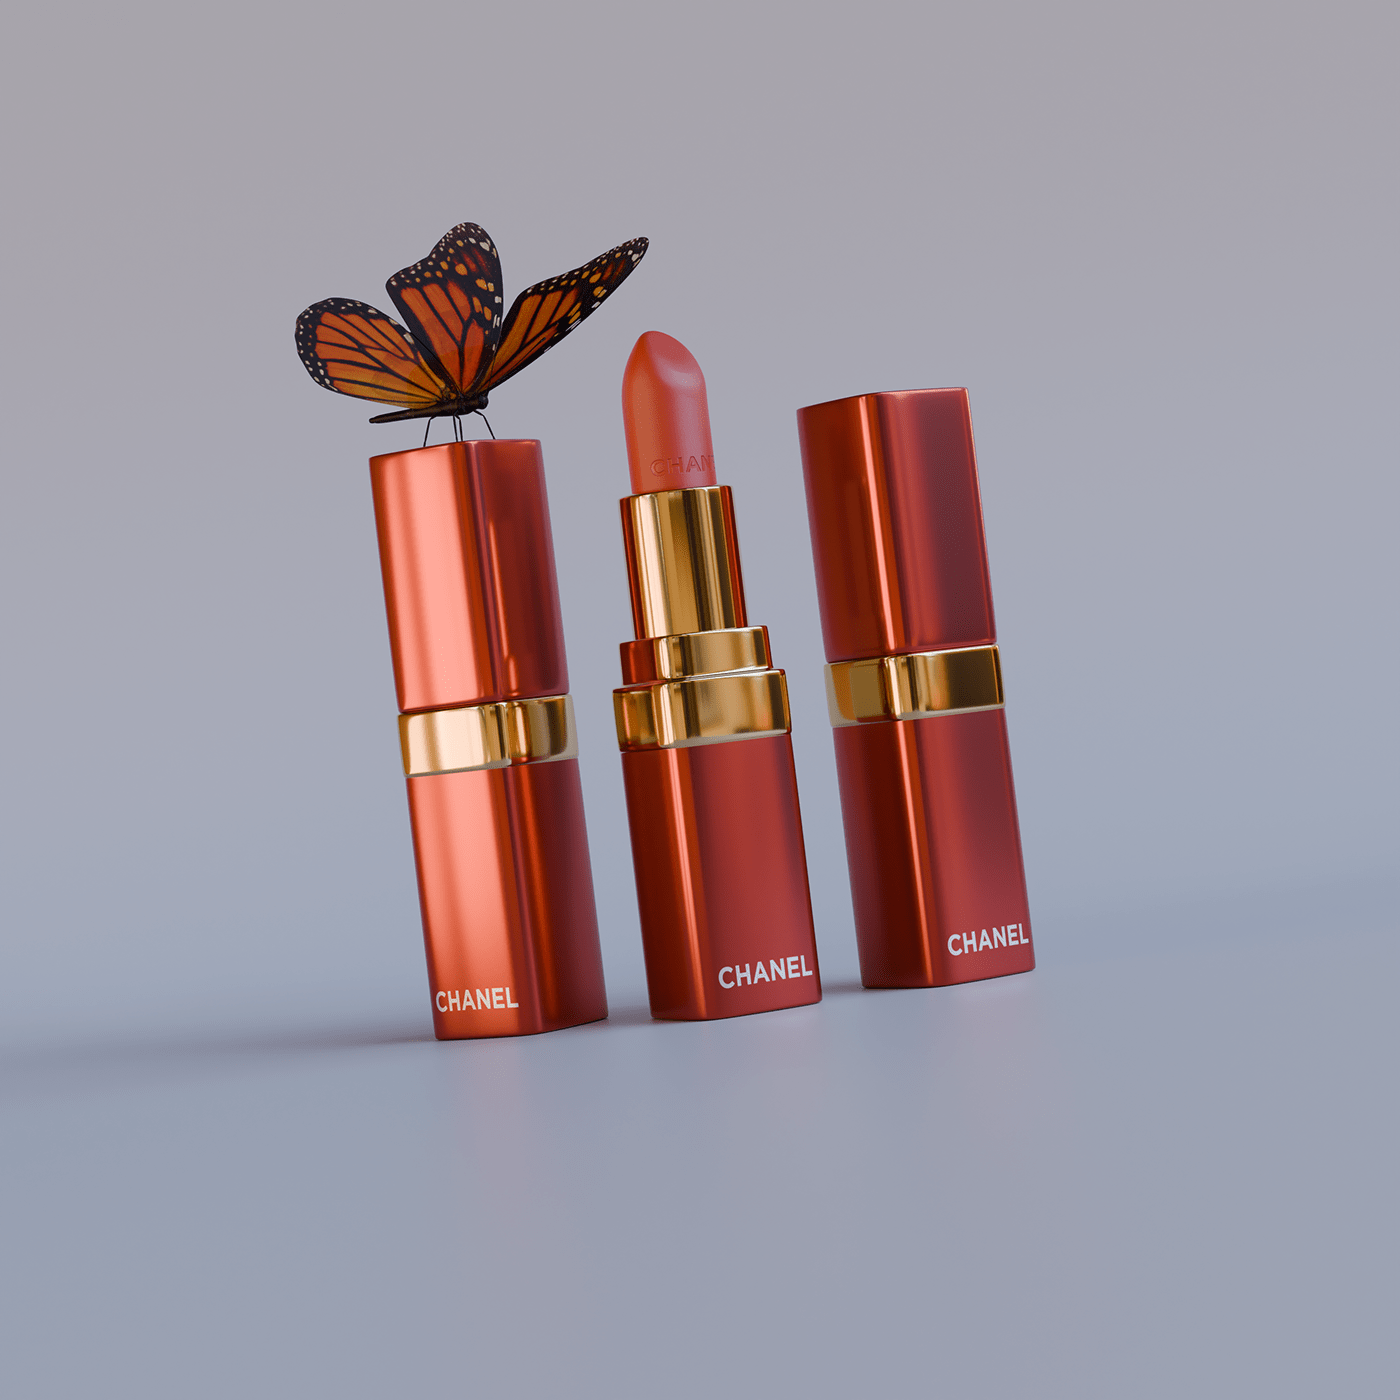 3D 3d modeling Render rouge red makeup Product Photography beauty Fashion  lipstick